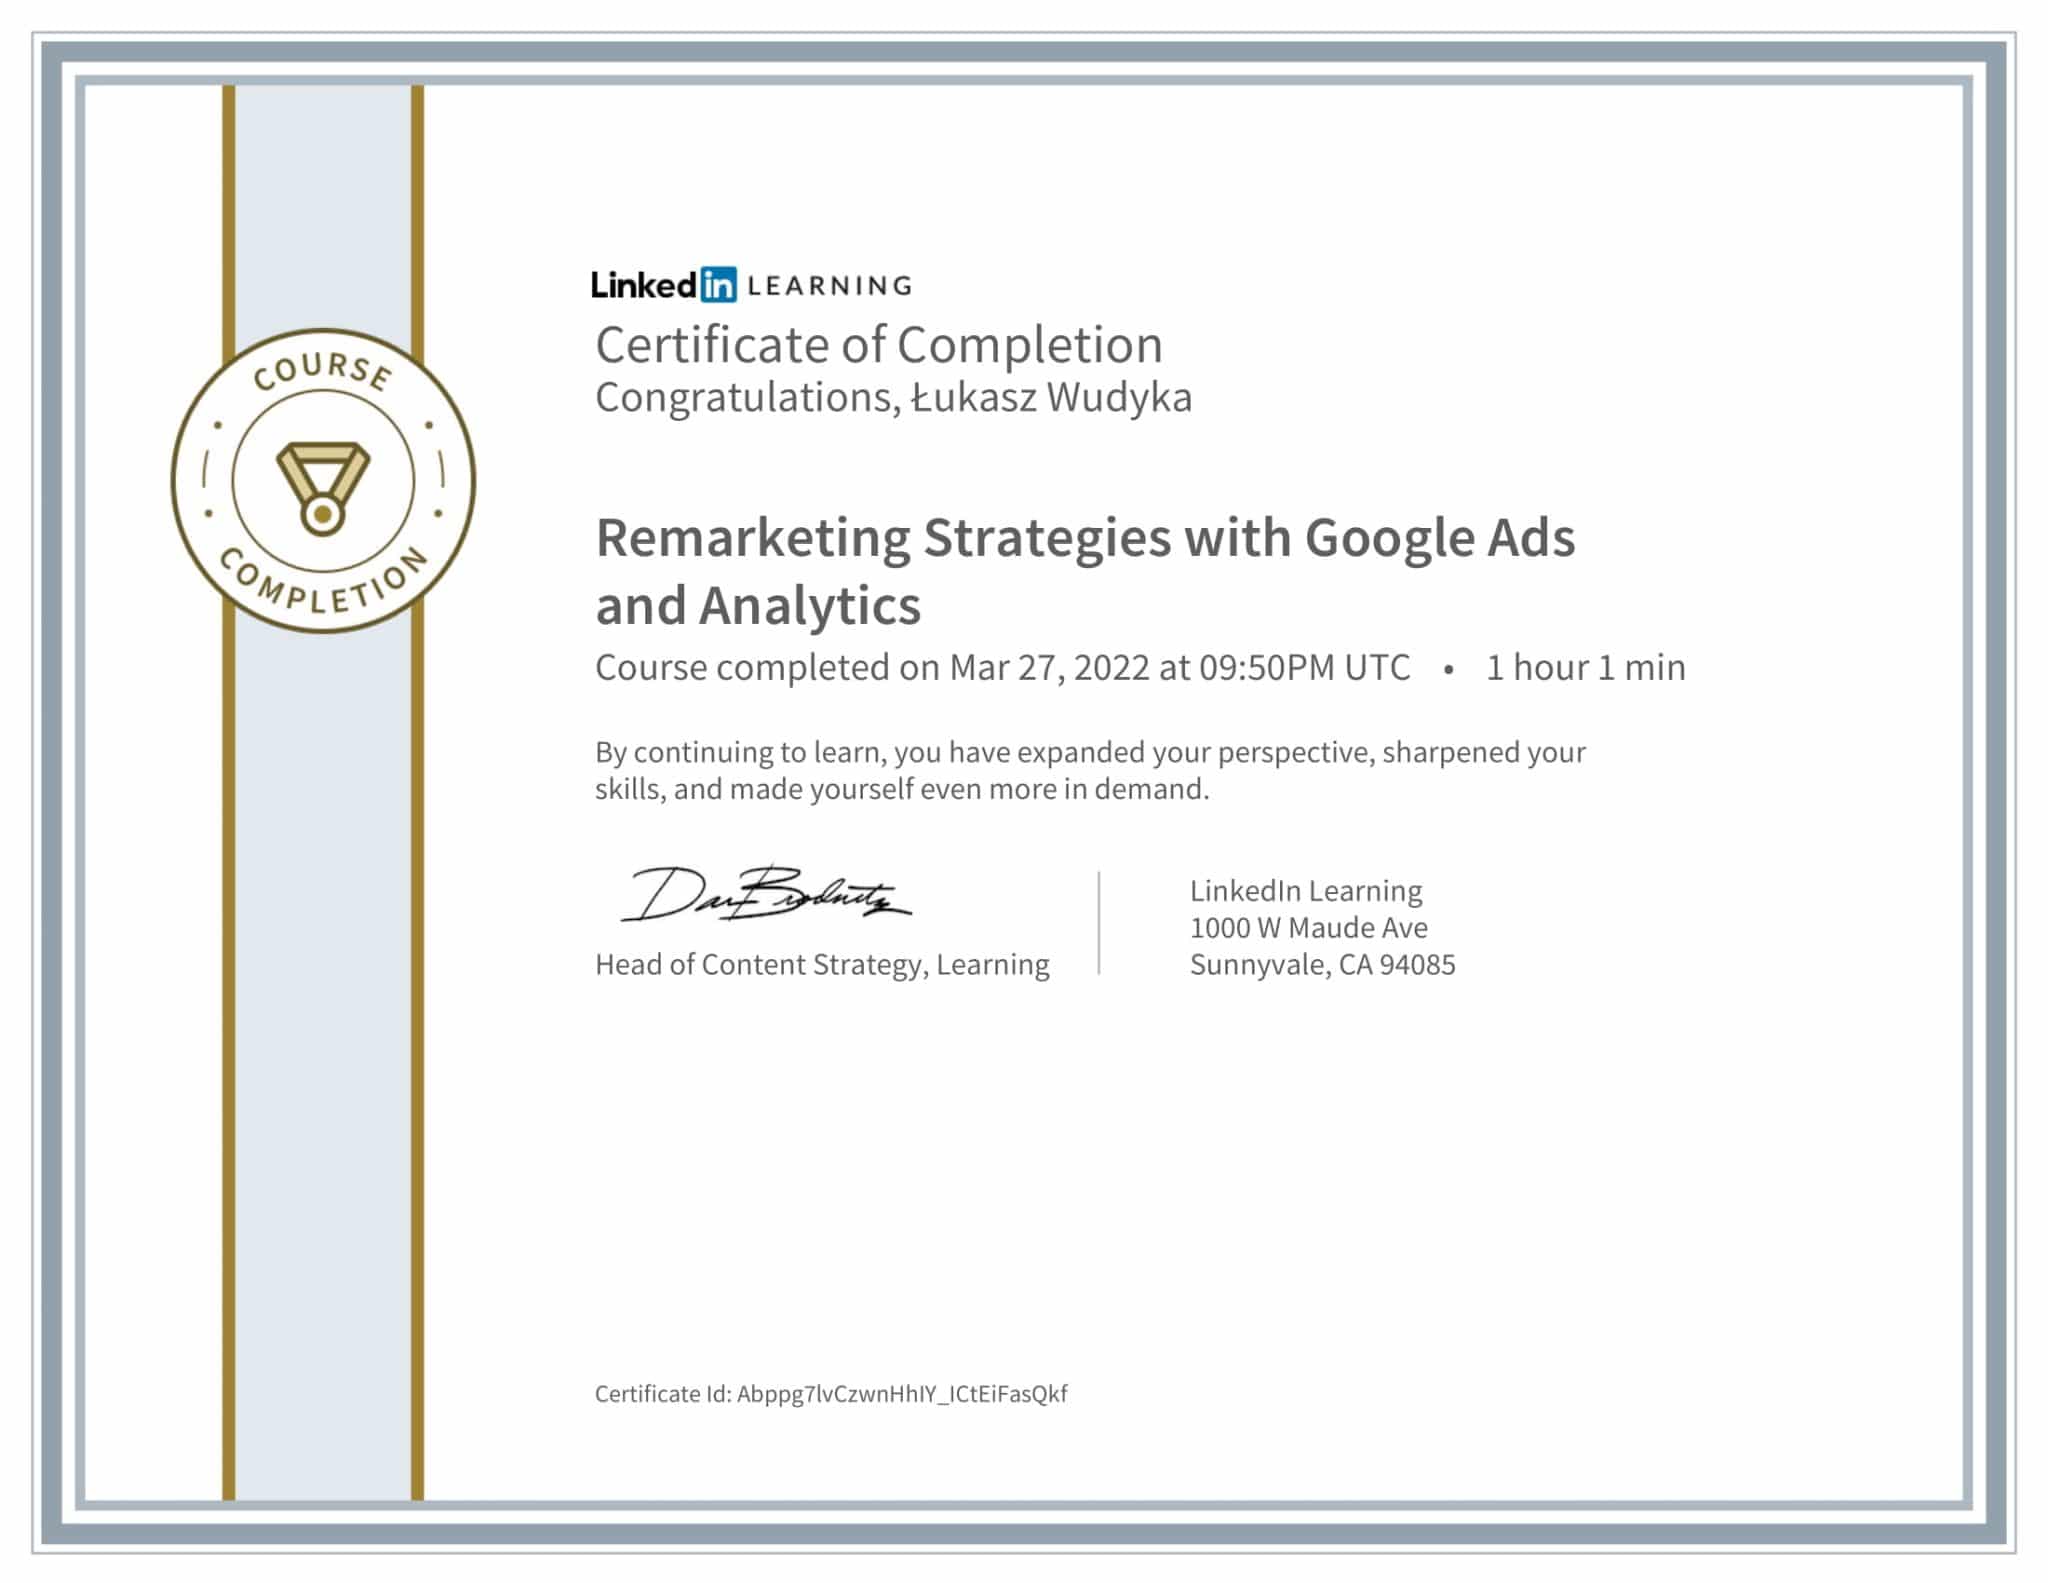 CertificateOfCompletion_Remarketing Strategies with Google Ads and Analytics-1